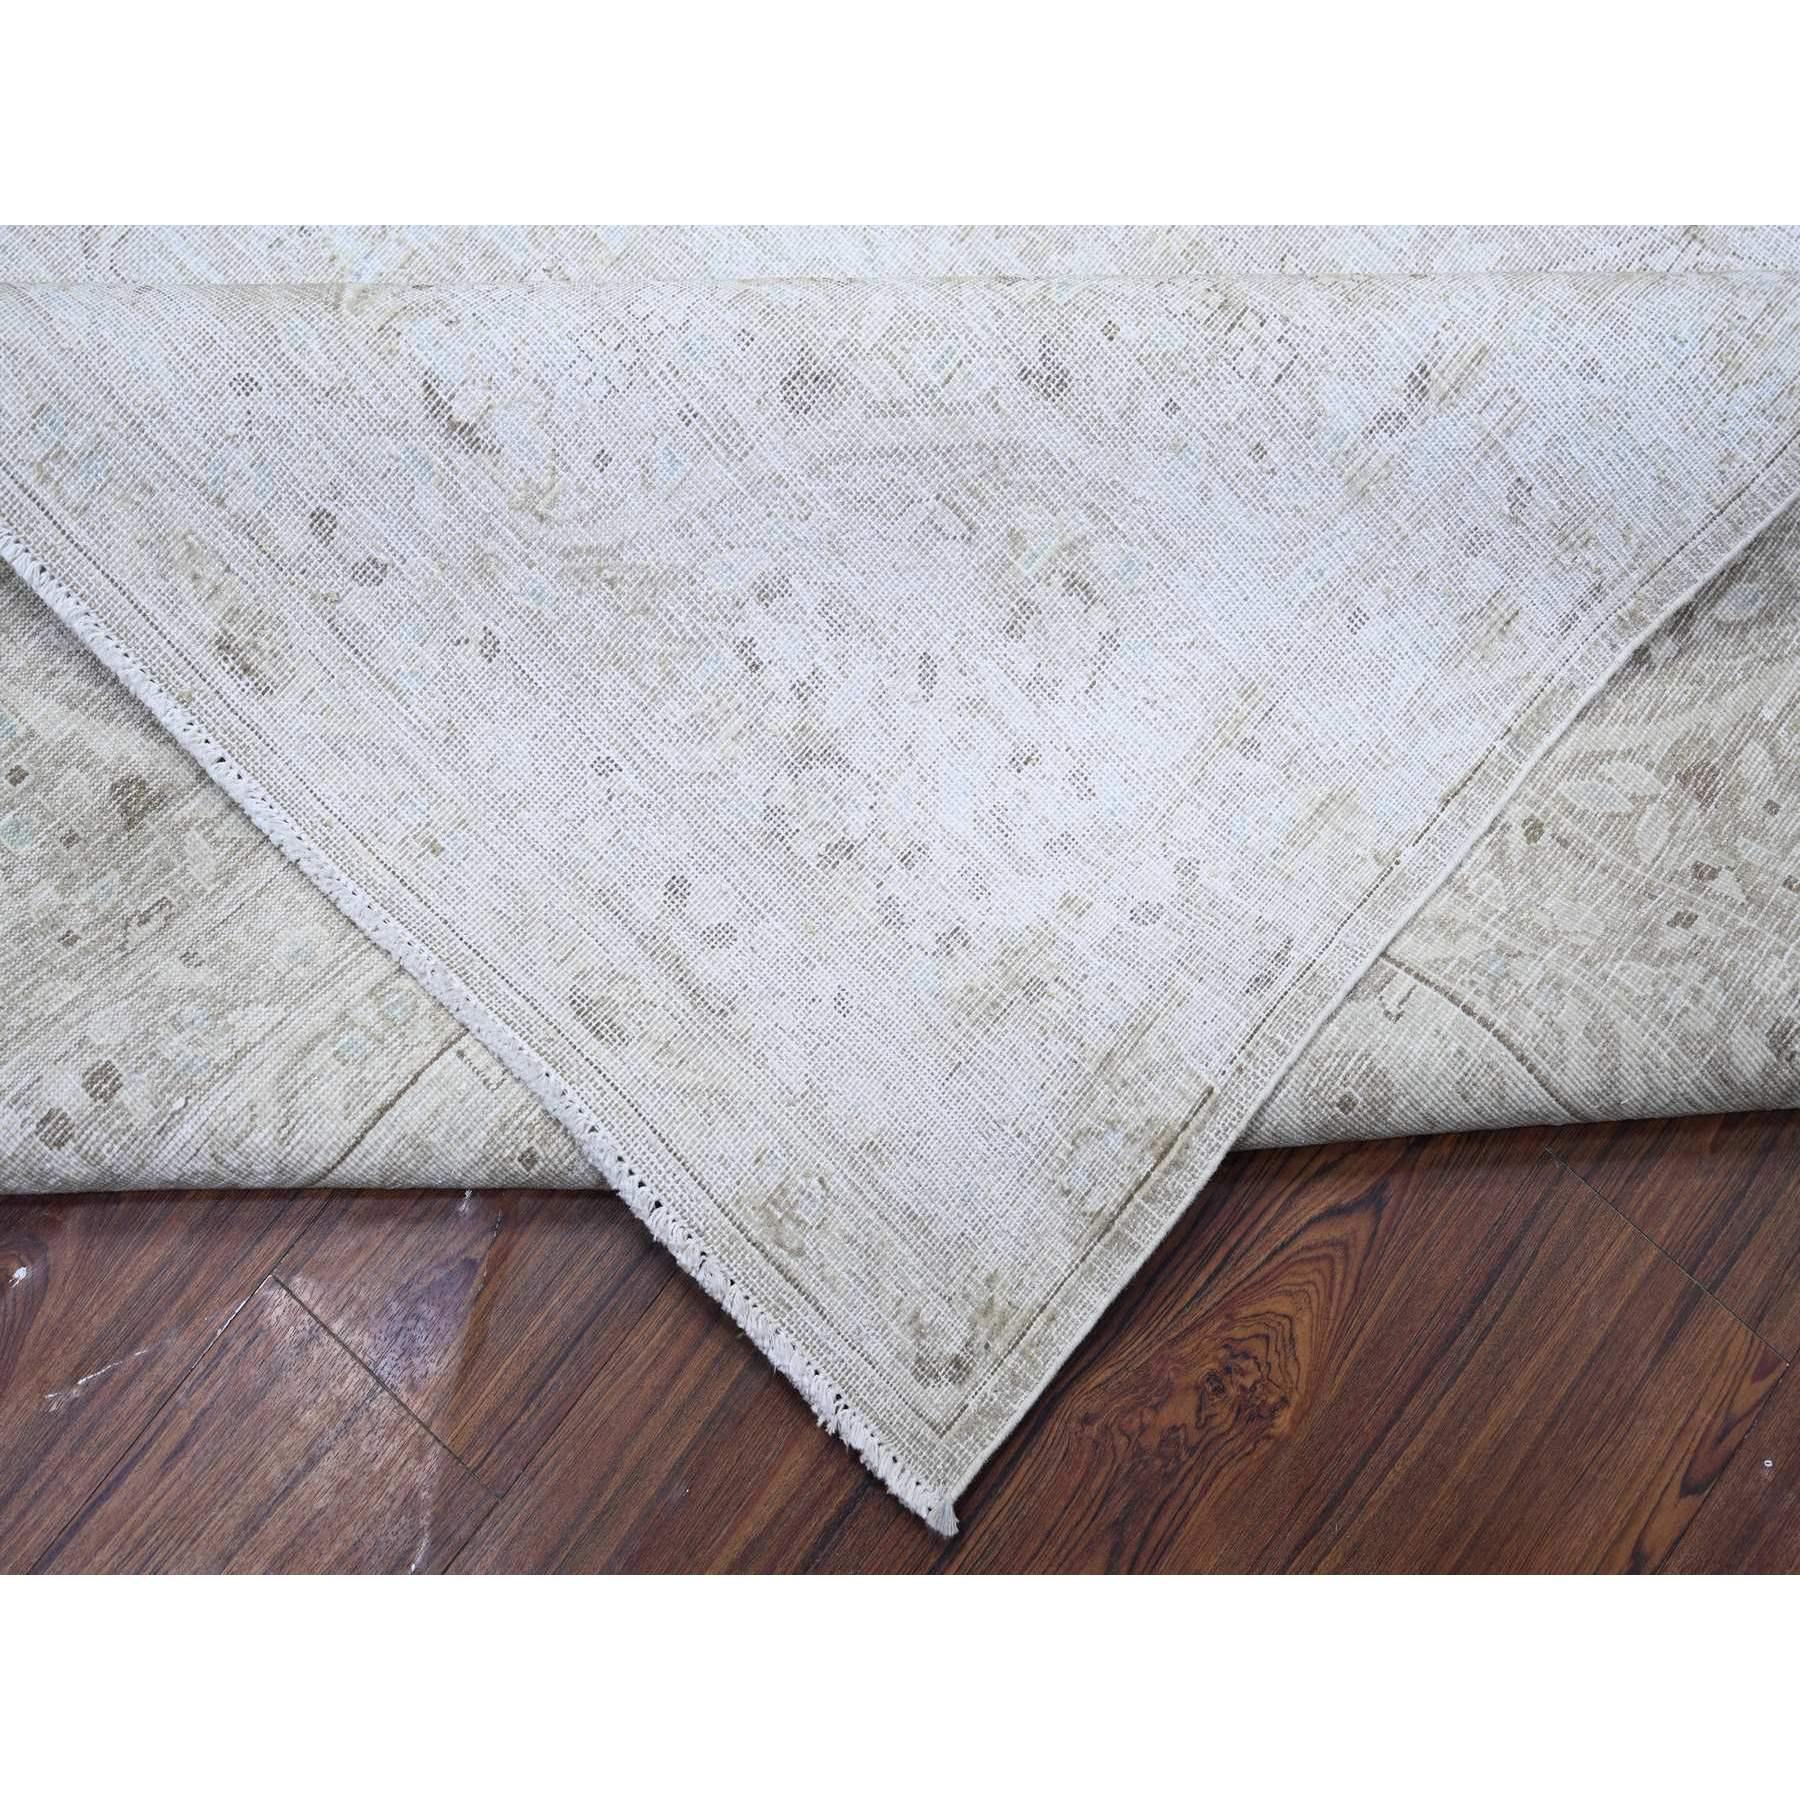 Mid-20th Century Monochromatic Colors Vintage Kerman Soft Worn Wool Hand Knotted Rug 9'9